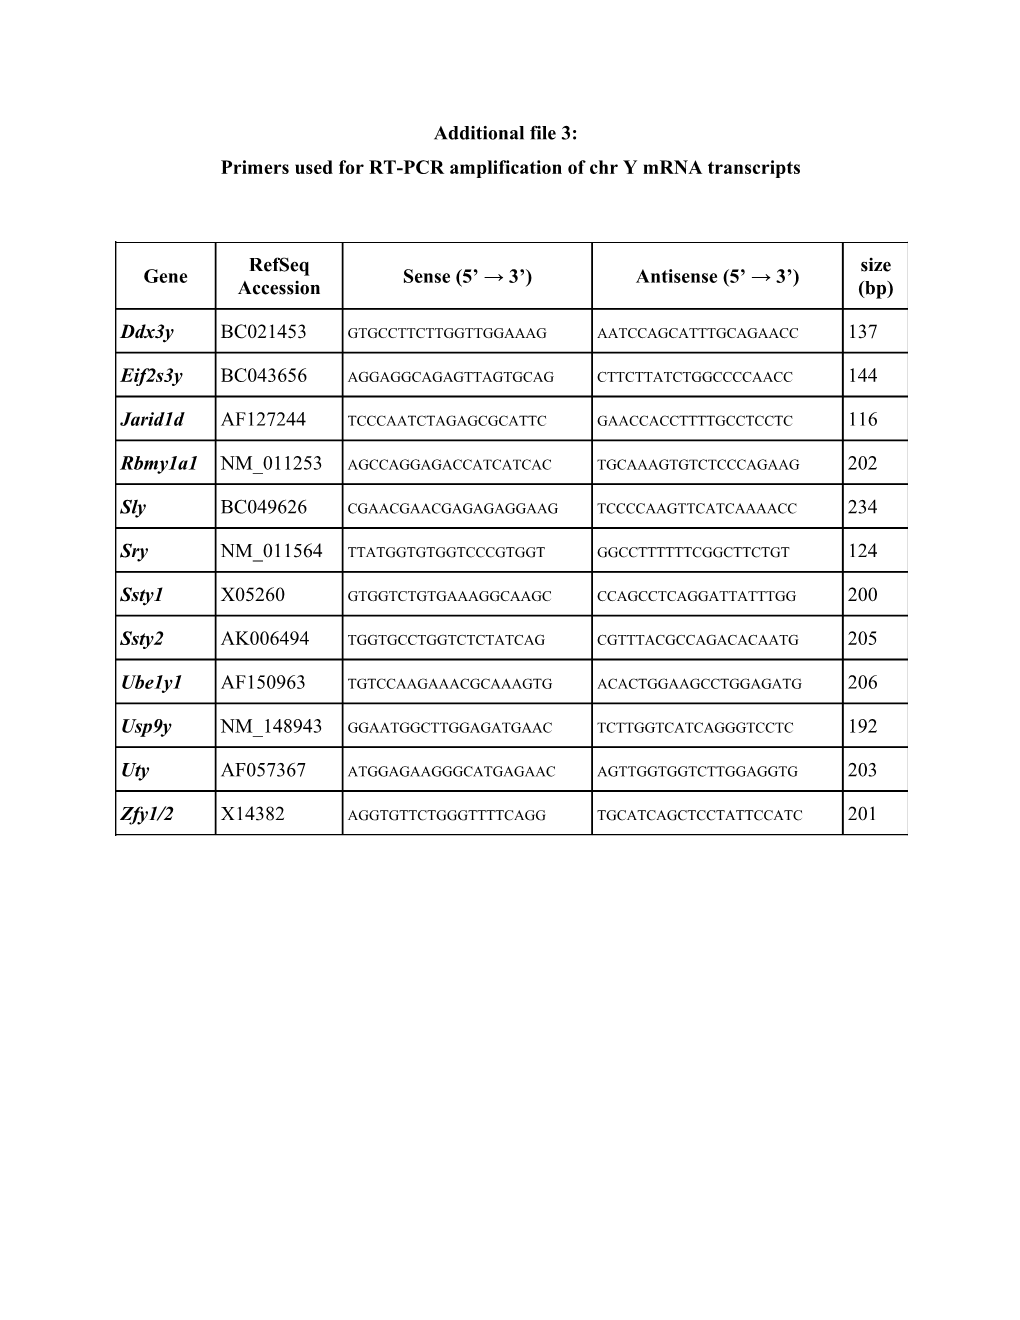 Additional File 3: Primers Used for RT-PCR Amplification of Chr Y Mrna Transcripts